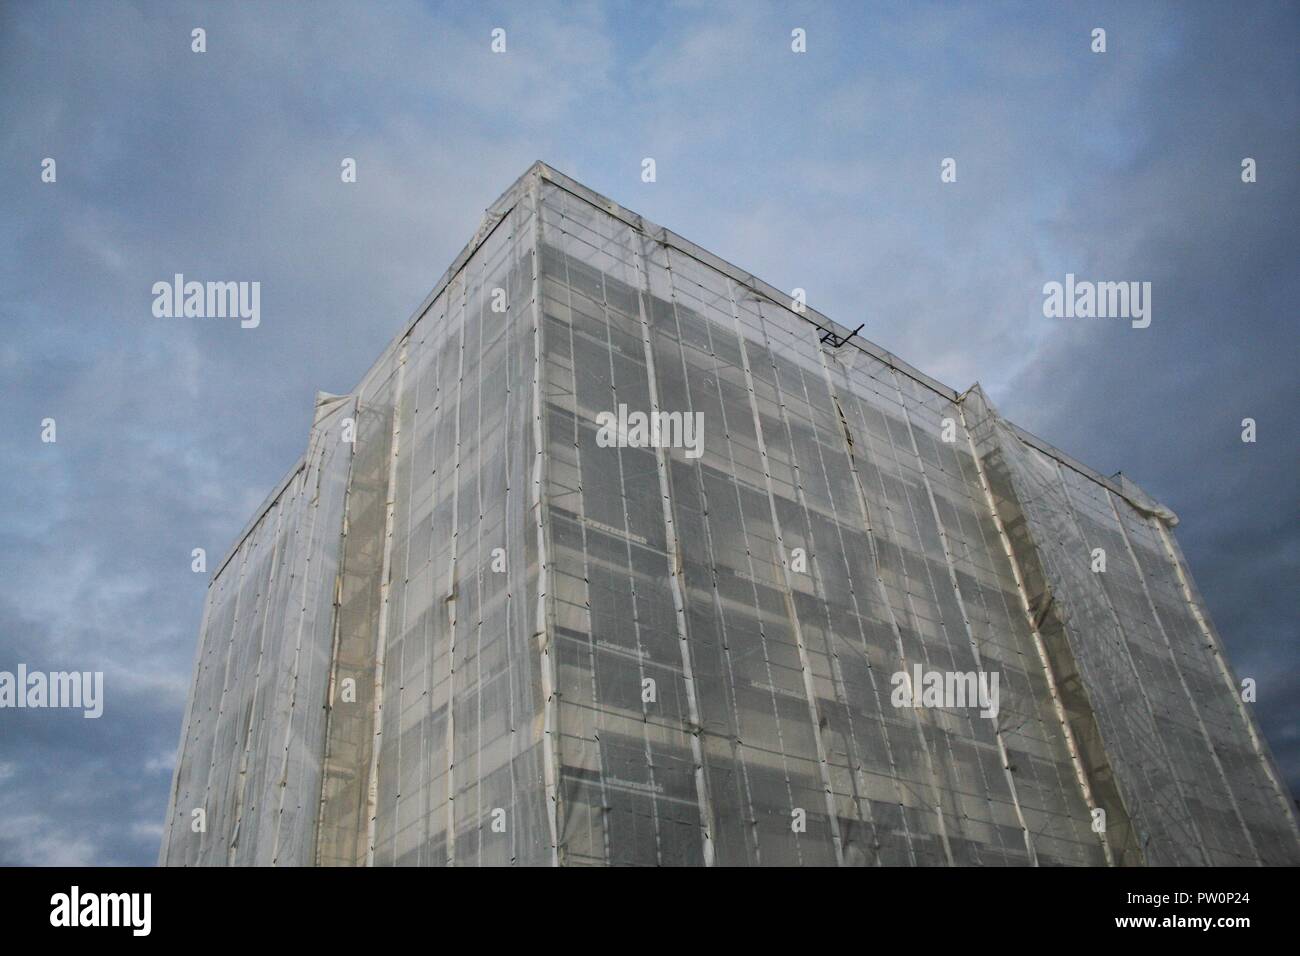 Building under construction with a scaffold Stock Photo